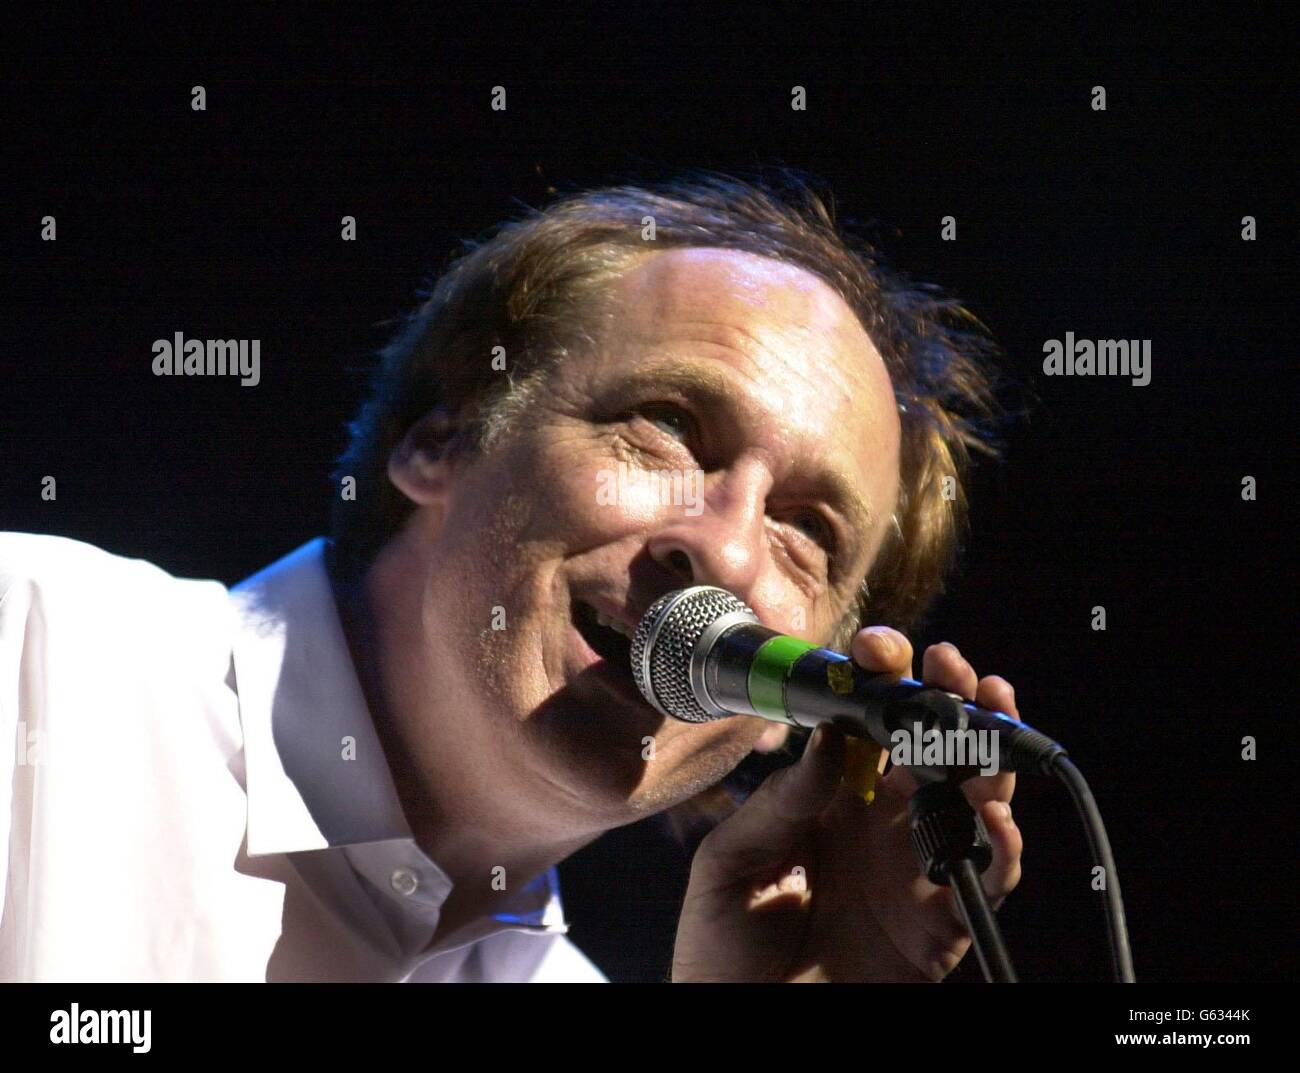 Singer, John Otway on stage at The Palladium in central London, Sunday October 6, 2002. An ecstatic John Otway today said getting his first top 10 hit was the most fantastic birthday present he had ever had. The former punk star - celebrating his 50th birthday - paid tribute to the die-hard fans who helped him reach number nine in the charts with Bunsen Burner, 25 years after his last musical success. Stock Photo